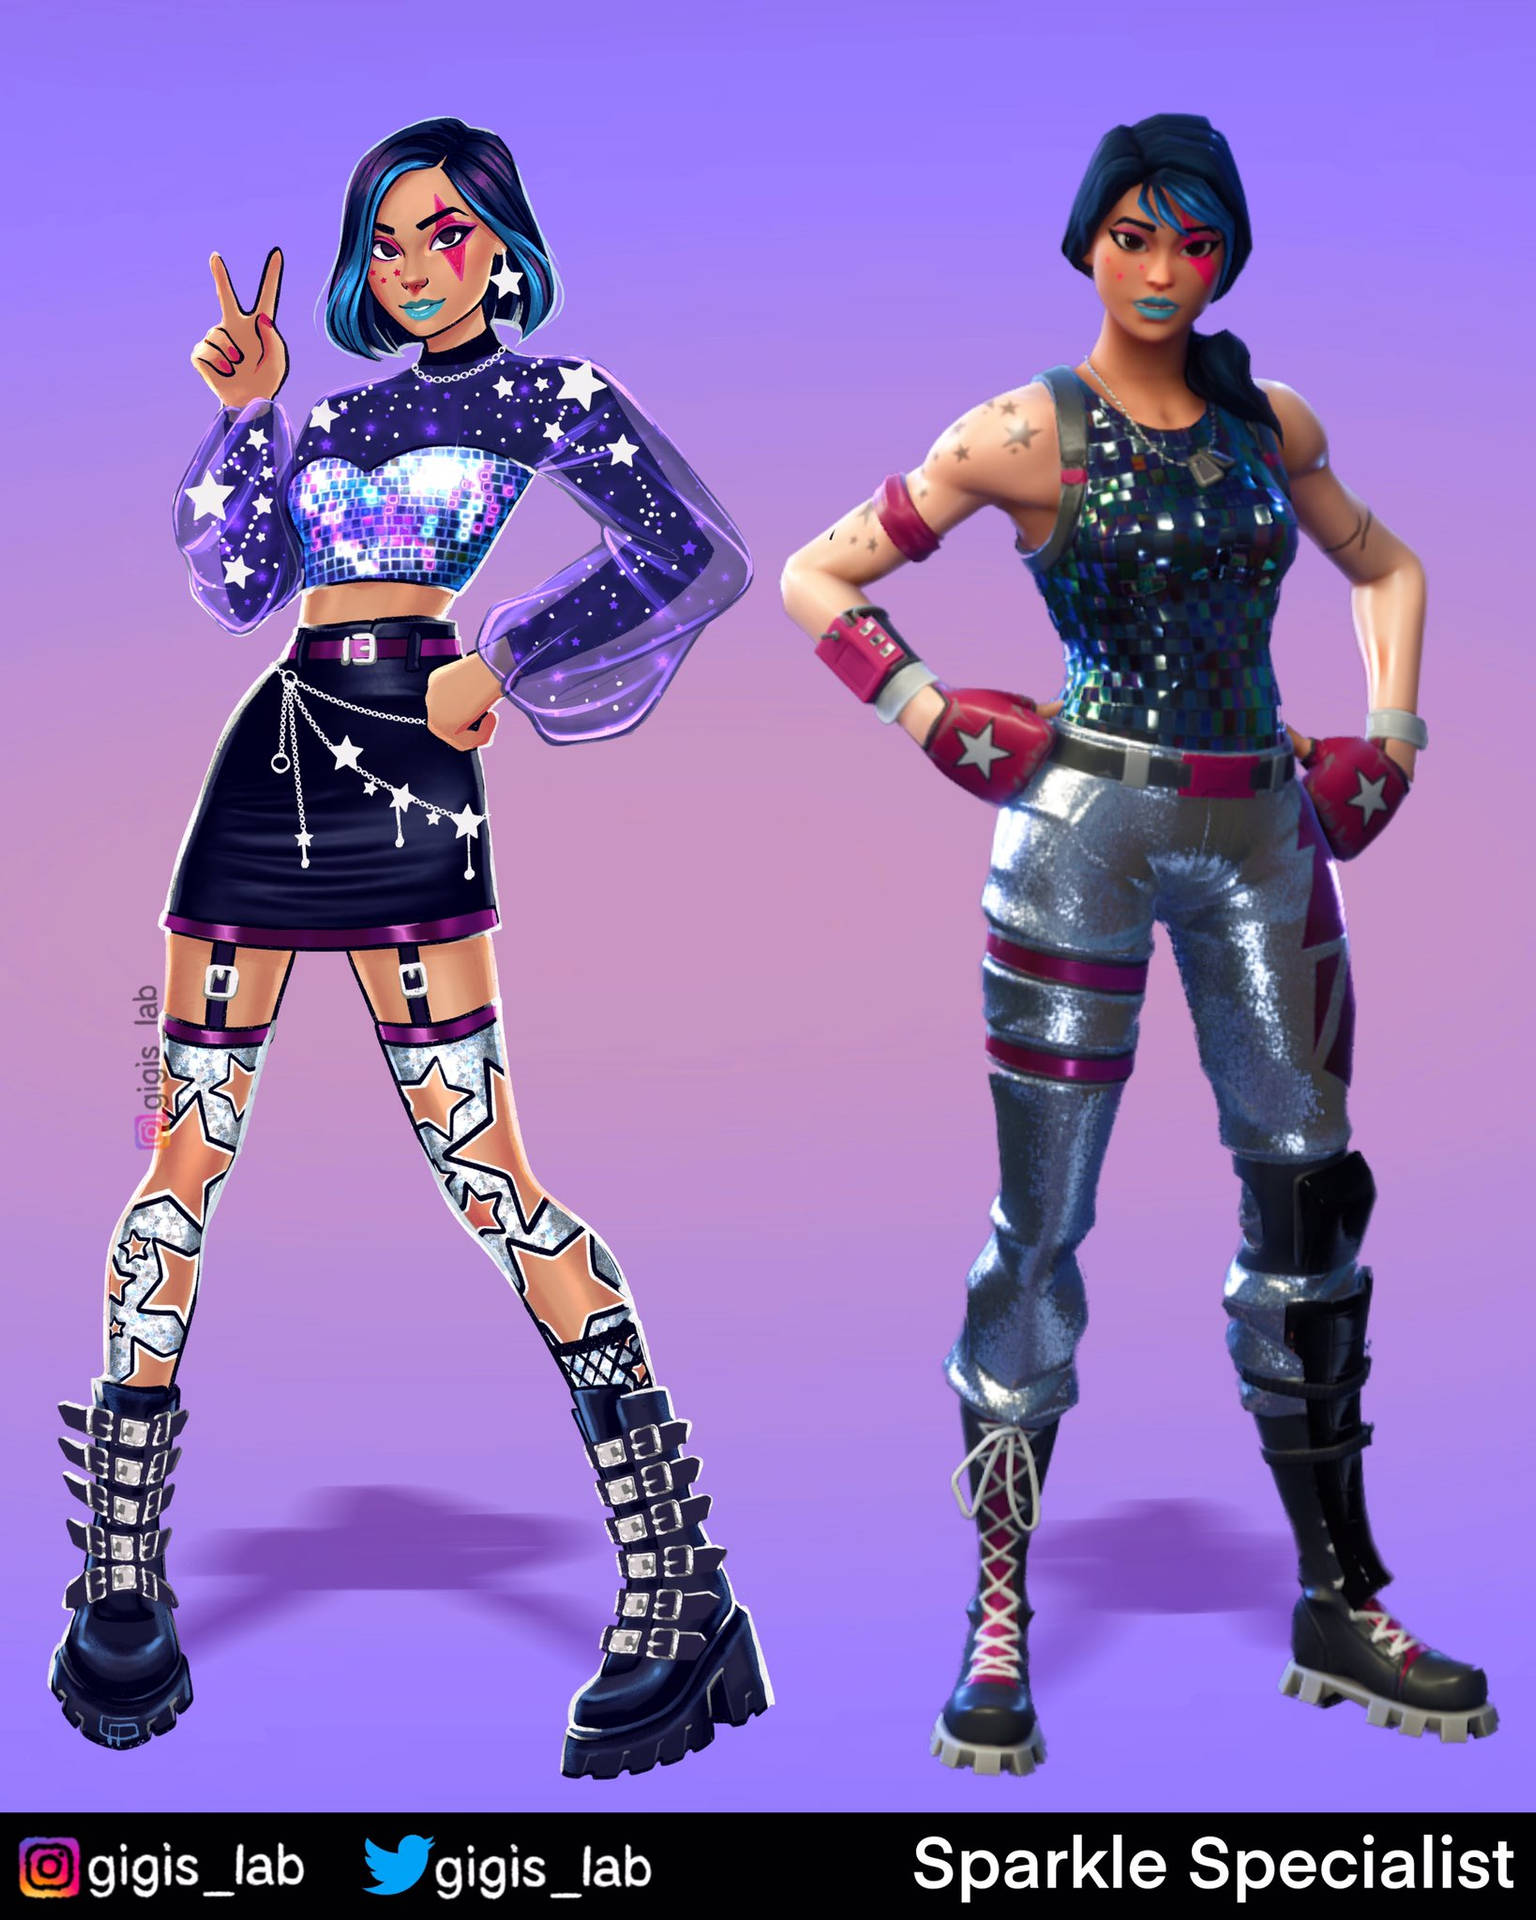 Enjoy the brilliance of the iconic Sparkles Specialist from Fortnite! Wallpaper